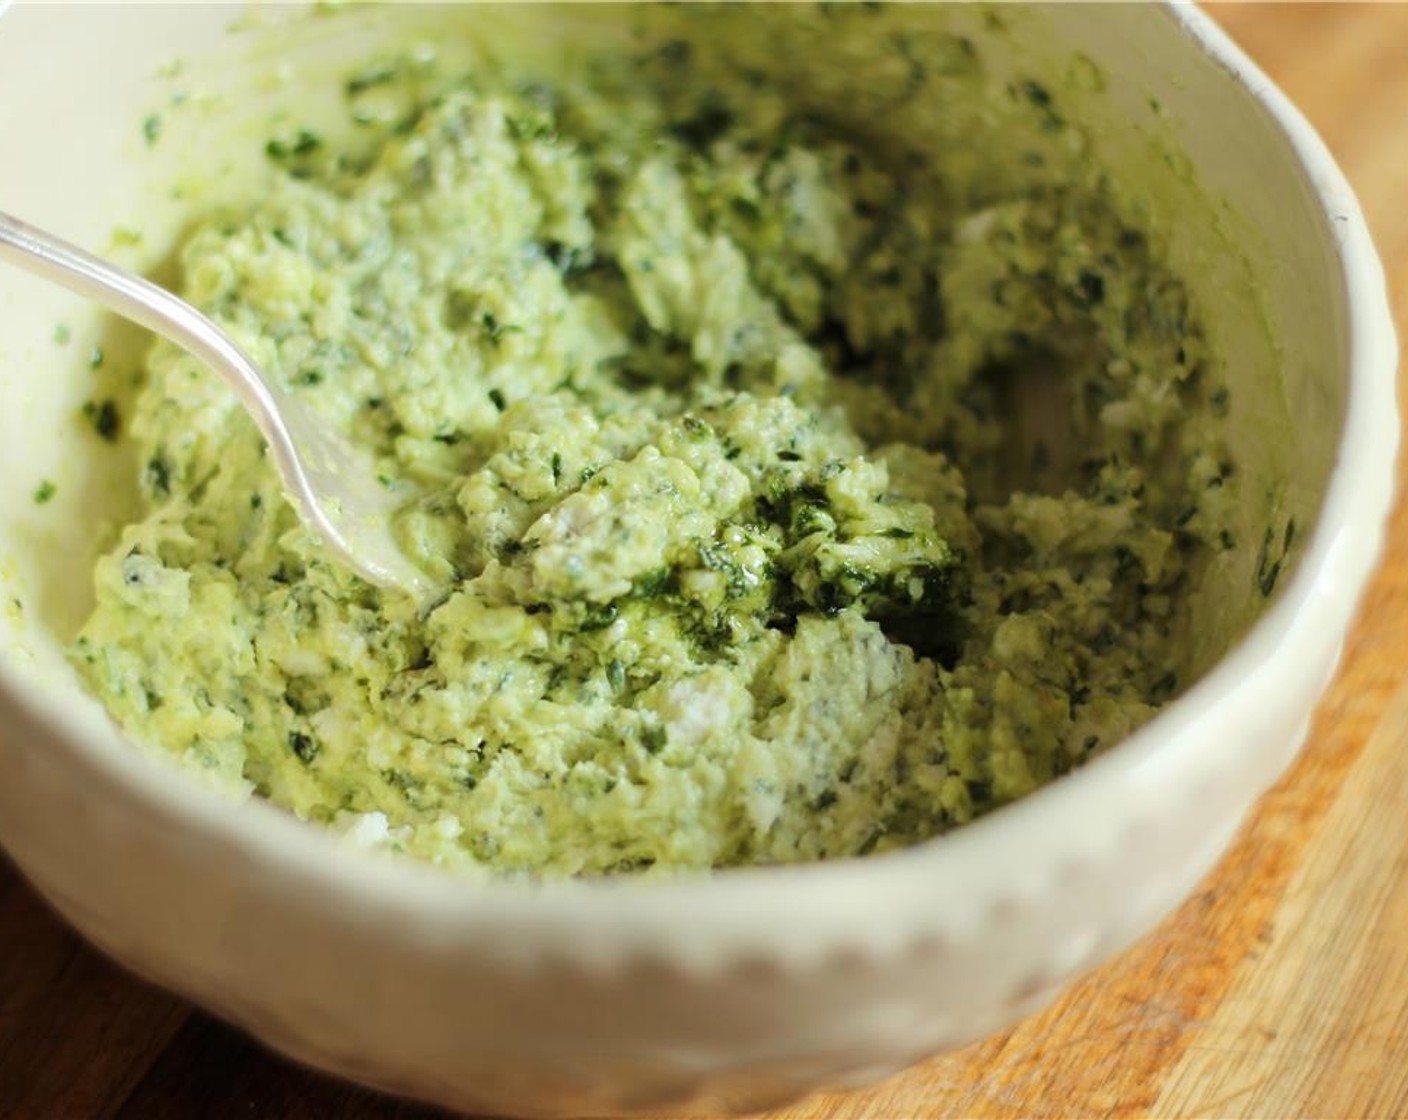 step 5 Stir in the Basil Pesto (1/4 cup) and Heavy Cream (2 Tbsp). Whip with the fork until smooth and creamy. Adjust seasonings to taste.